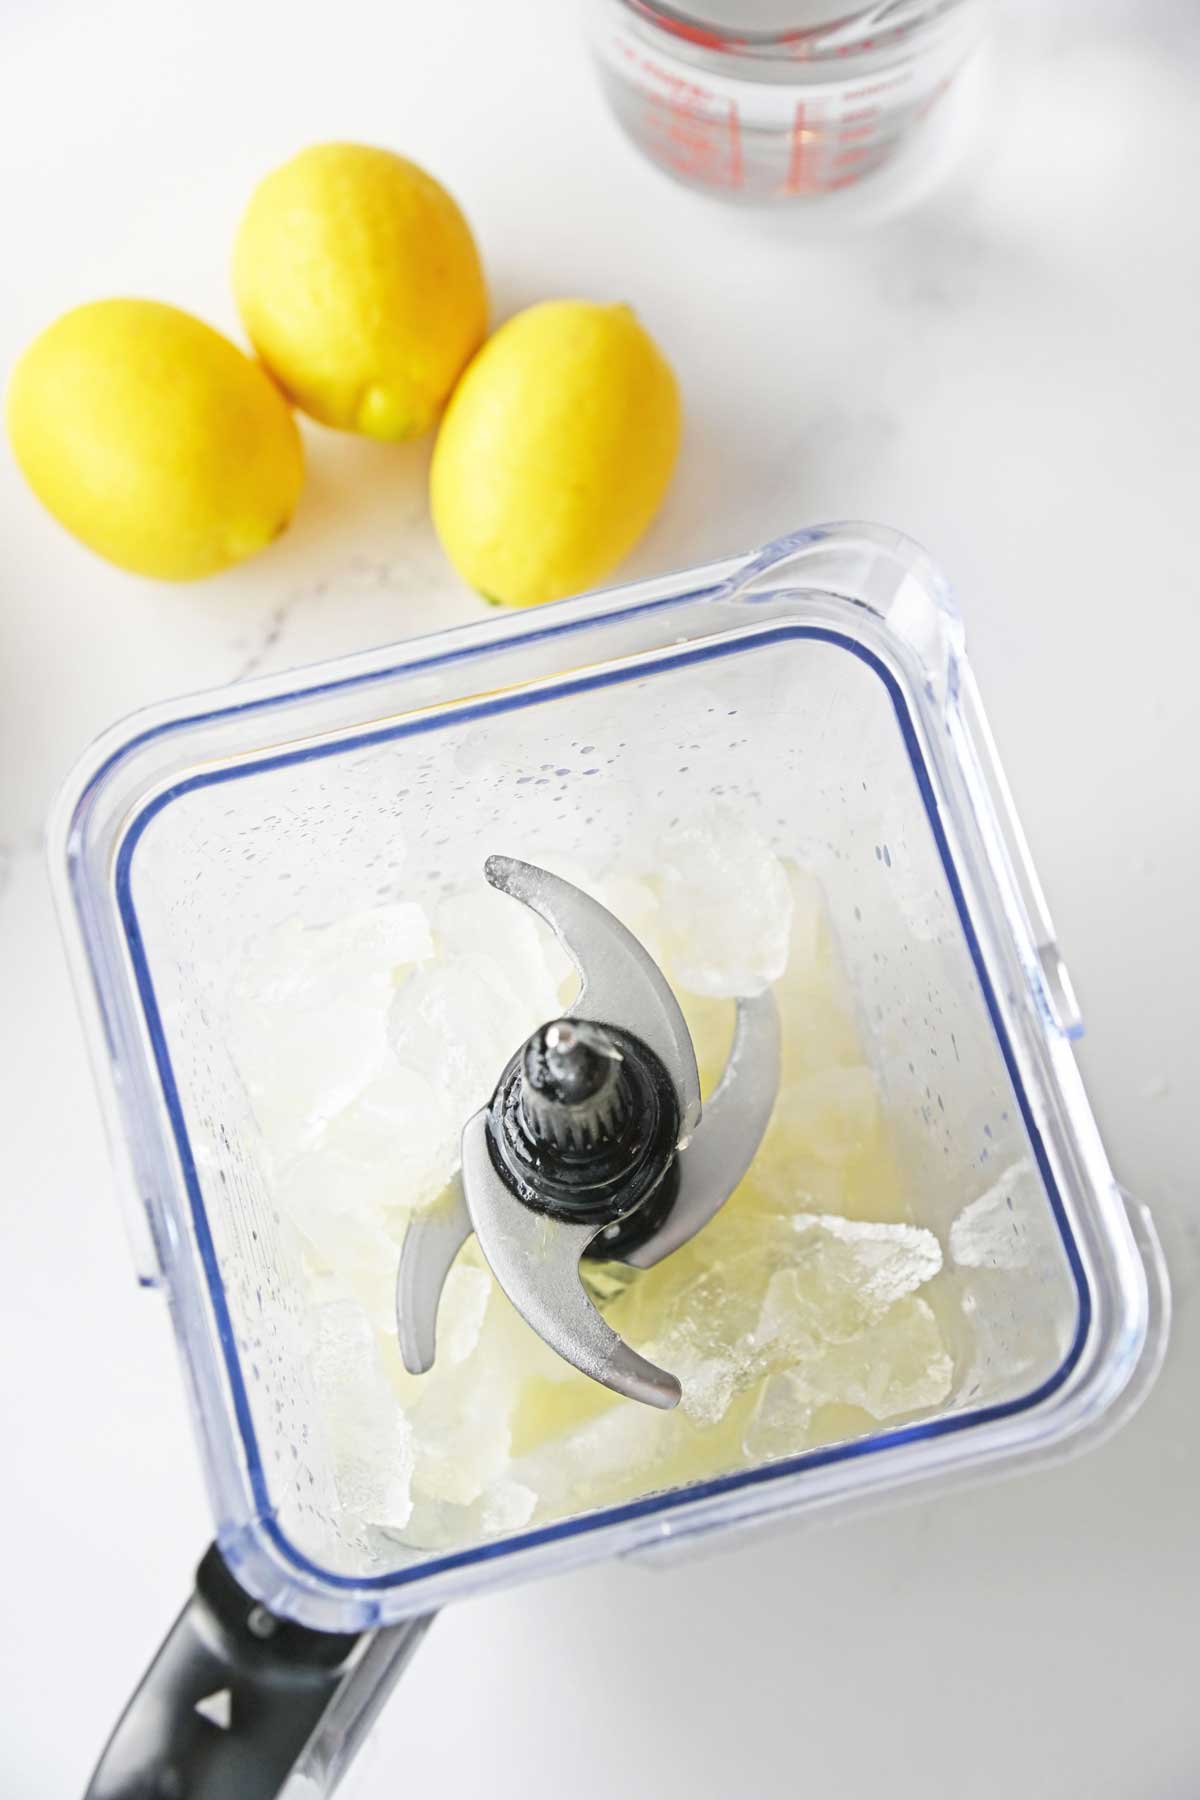 Blending the mixture all together is a process in preparing Lemonade Slushie